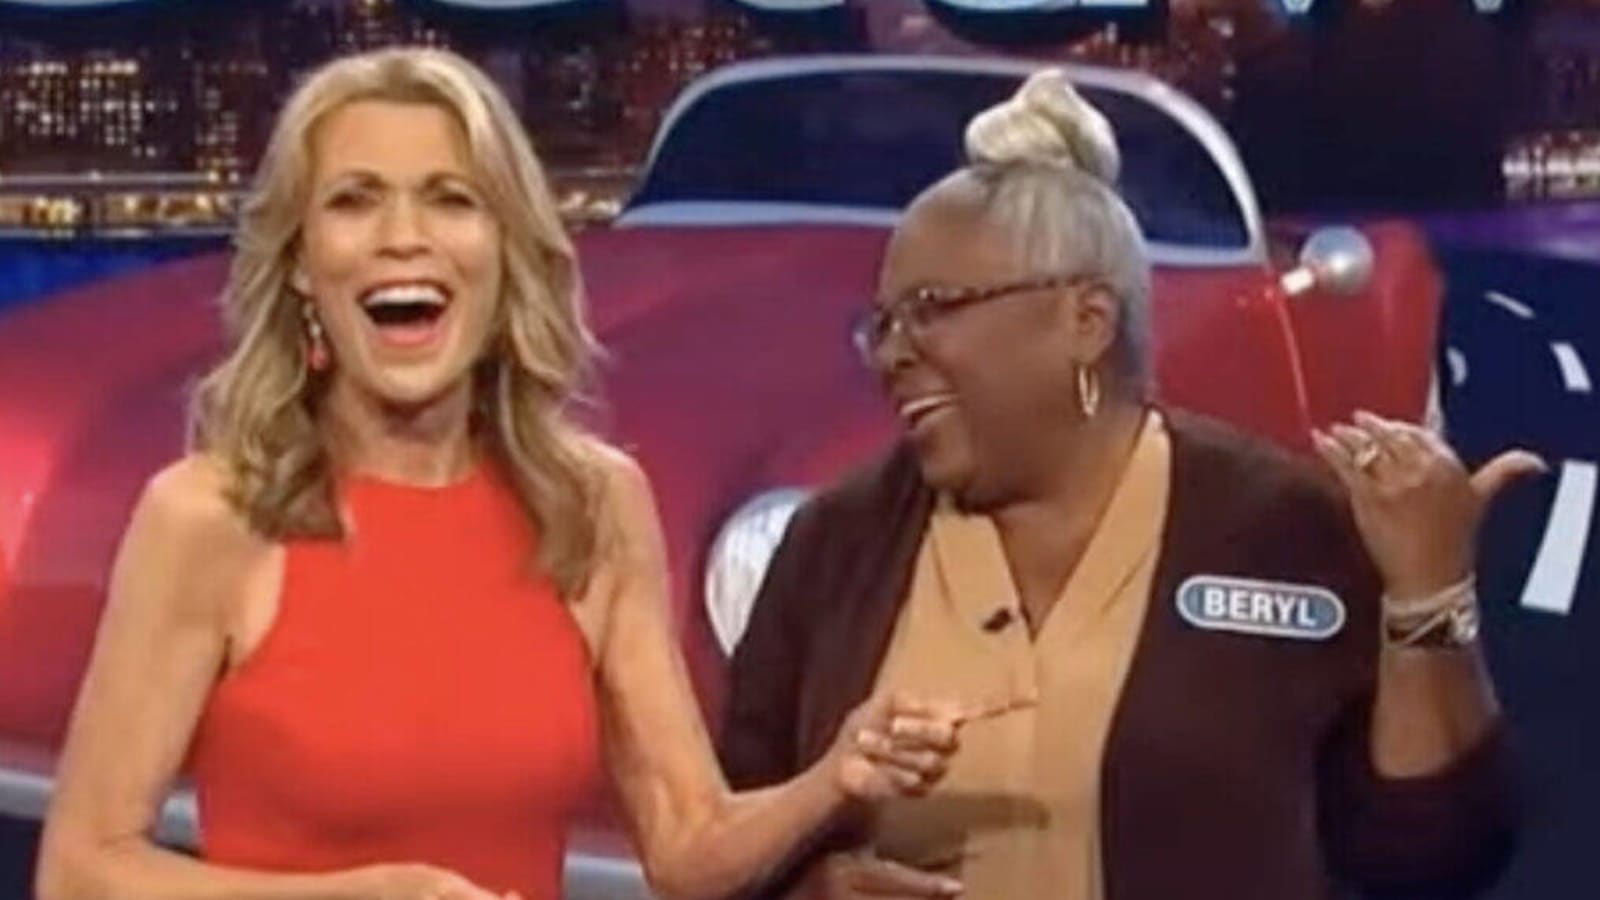 ‘Wheel of Fortune’: Vanna White Apologizes After Contestant Reveals Past Encounter